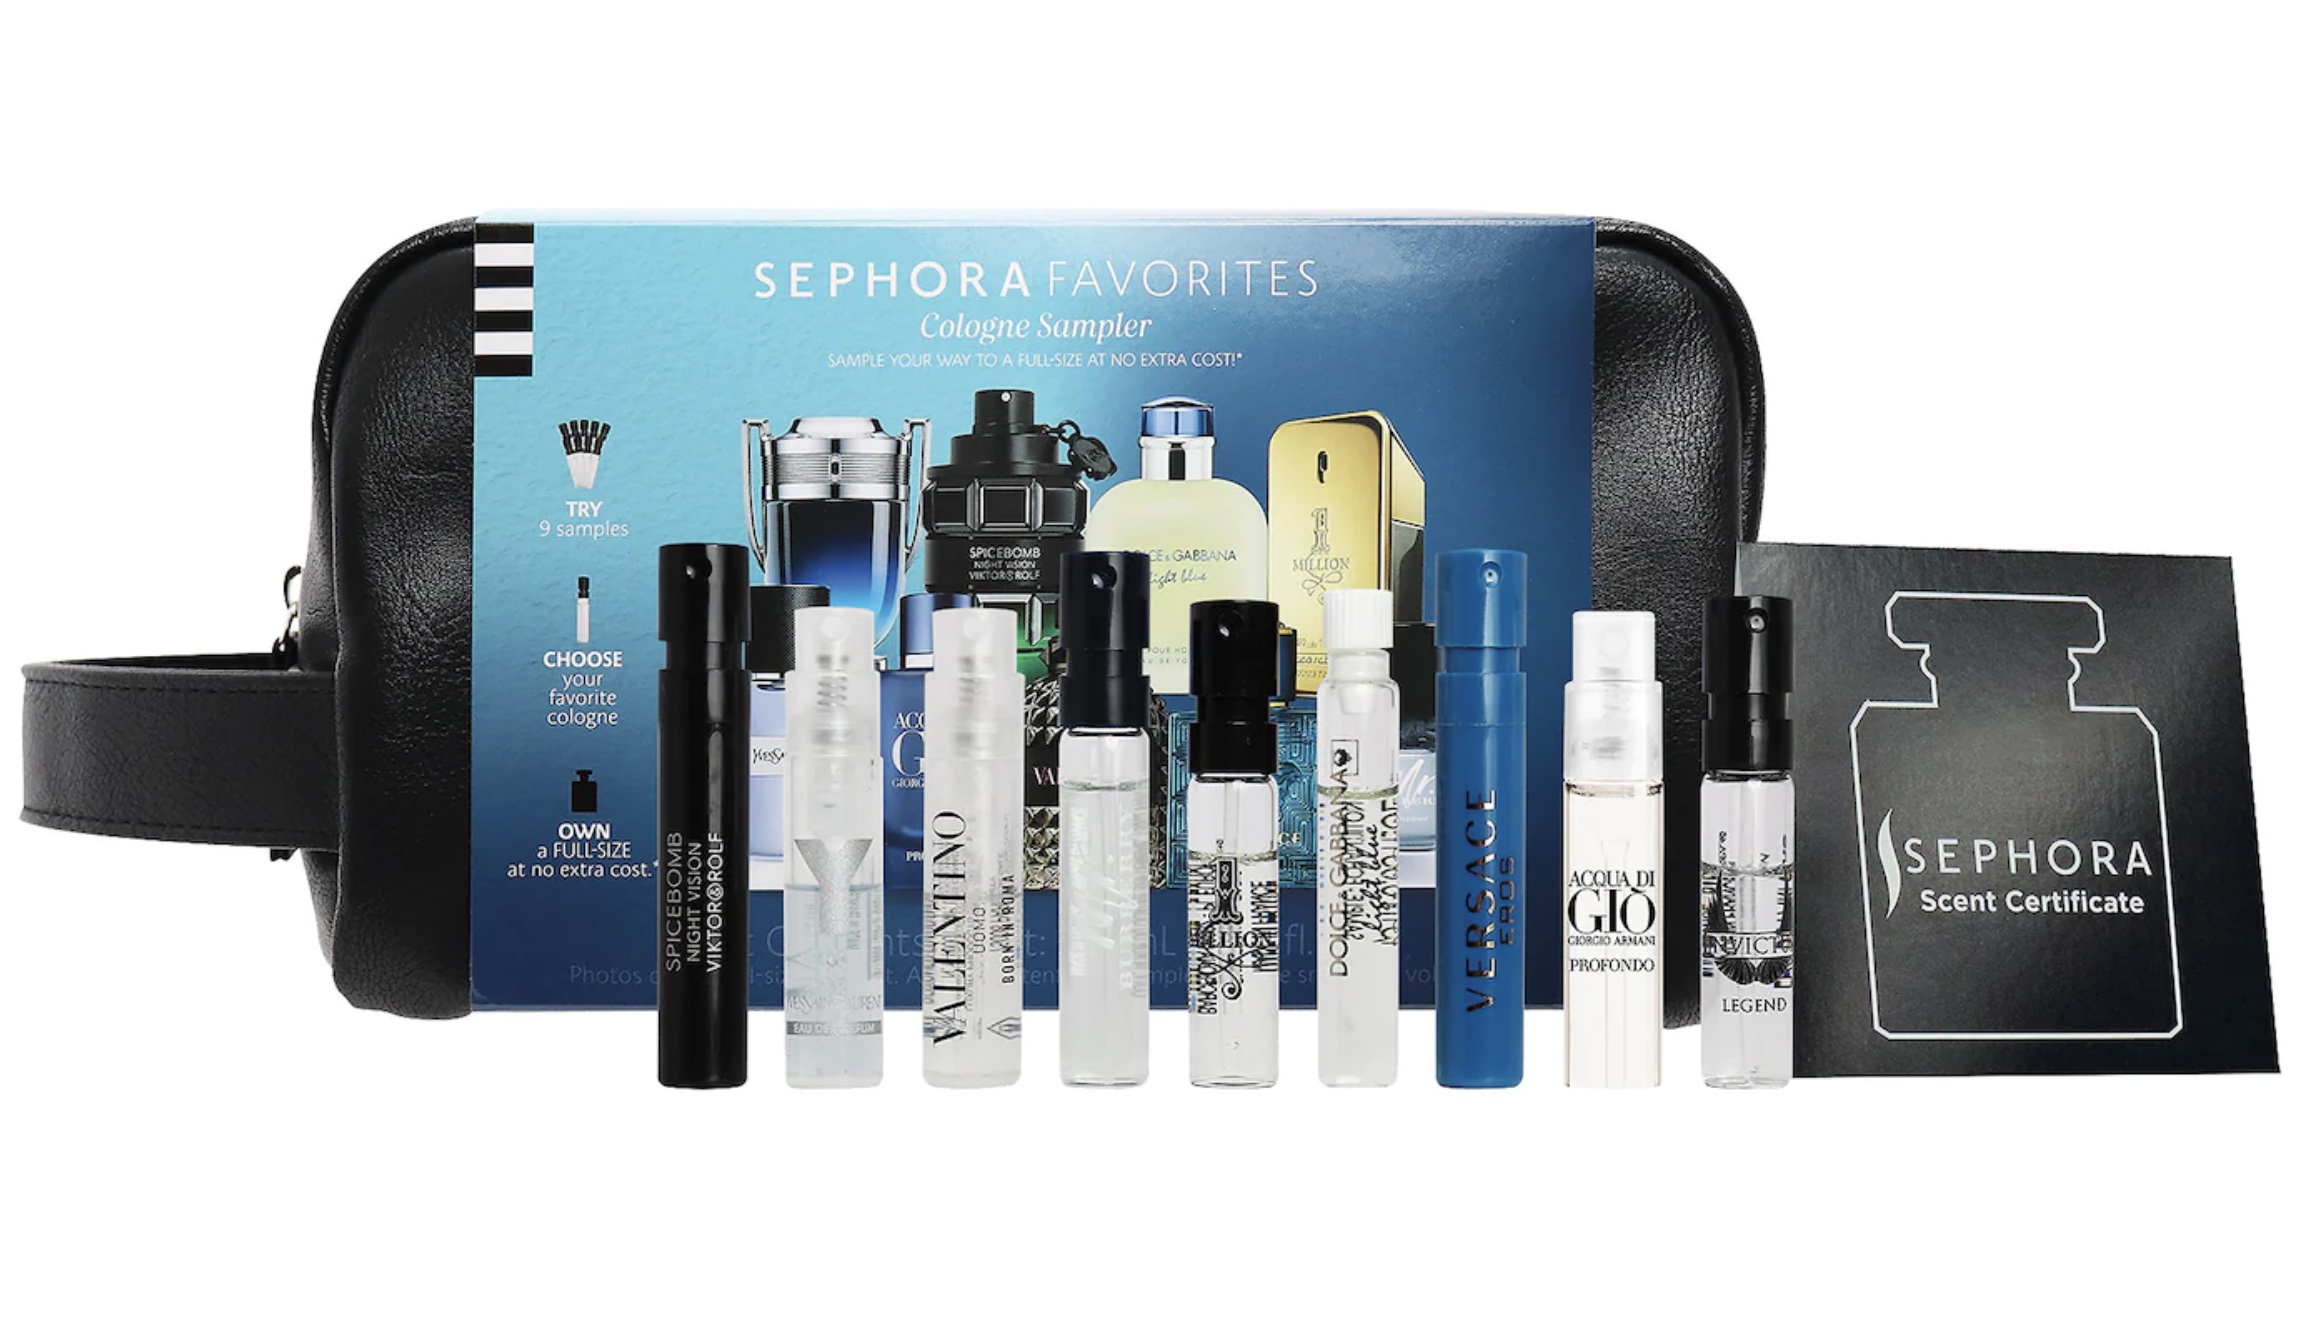 New Sephora Men's Cologne Sampler Kit Available Now + Coupons! Hello